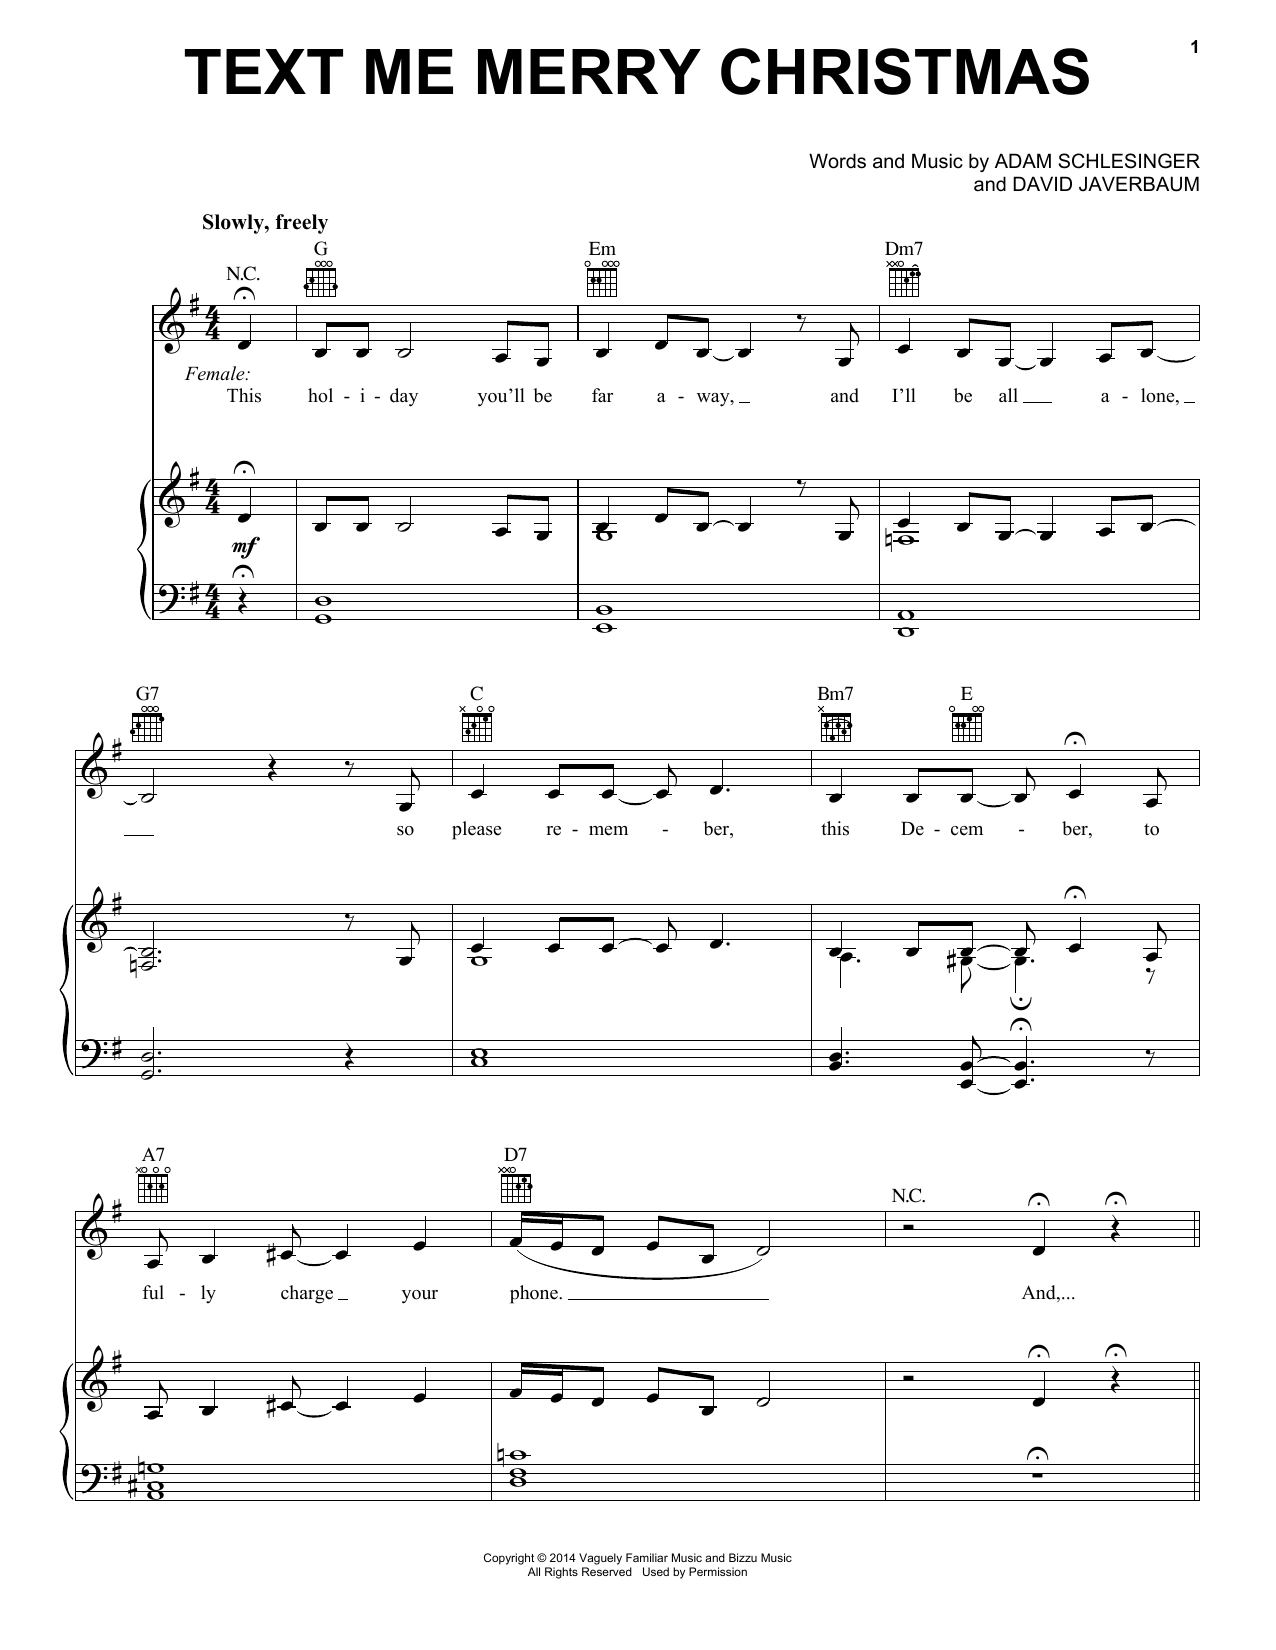 Text Me Merry Christmas Sheet Music by Adam Schlesinger for Piano ...